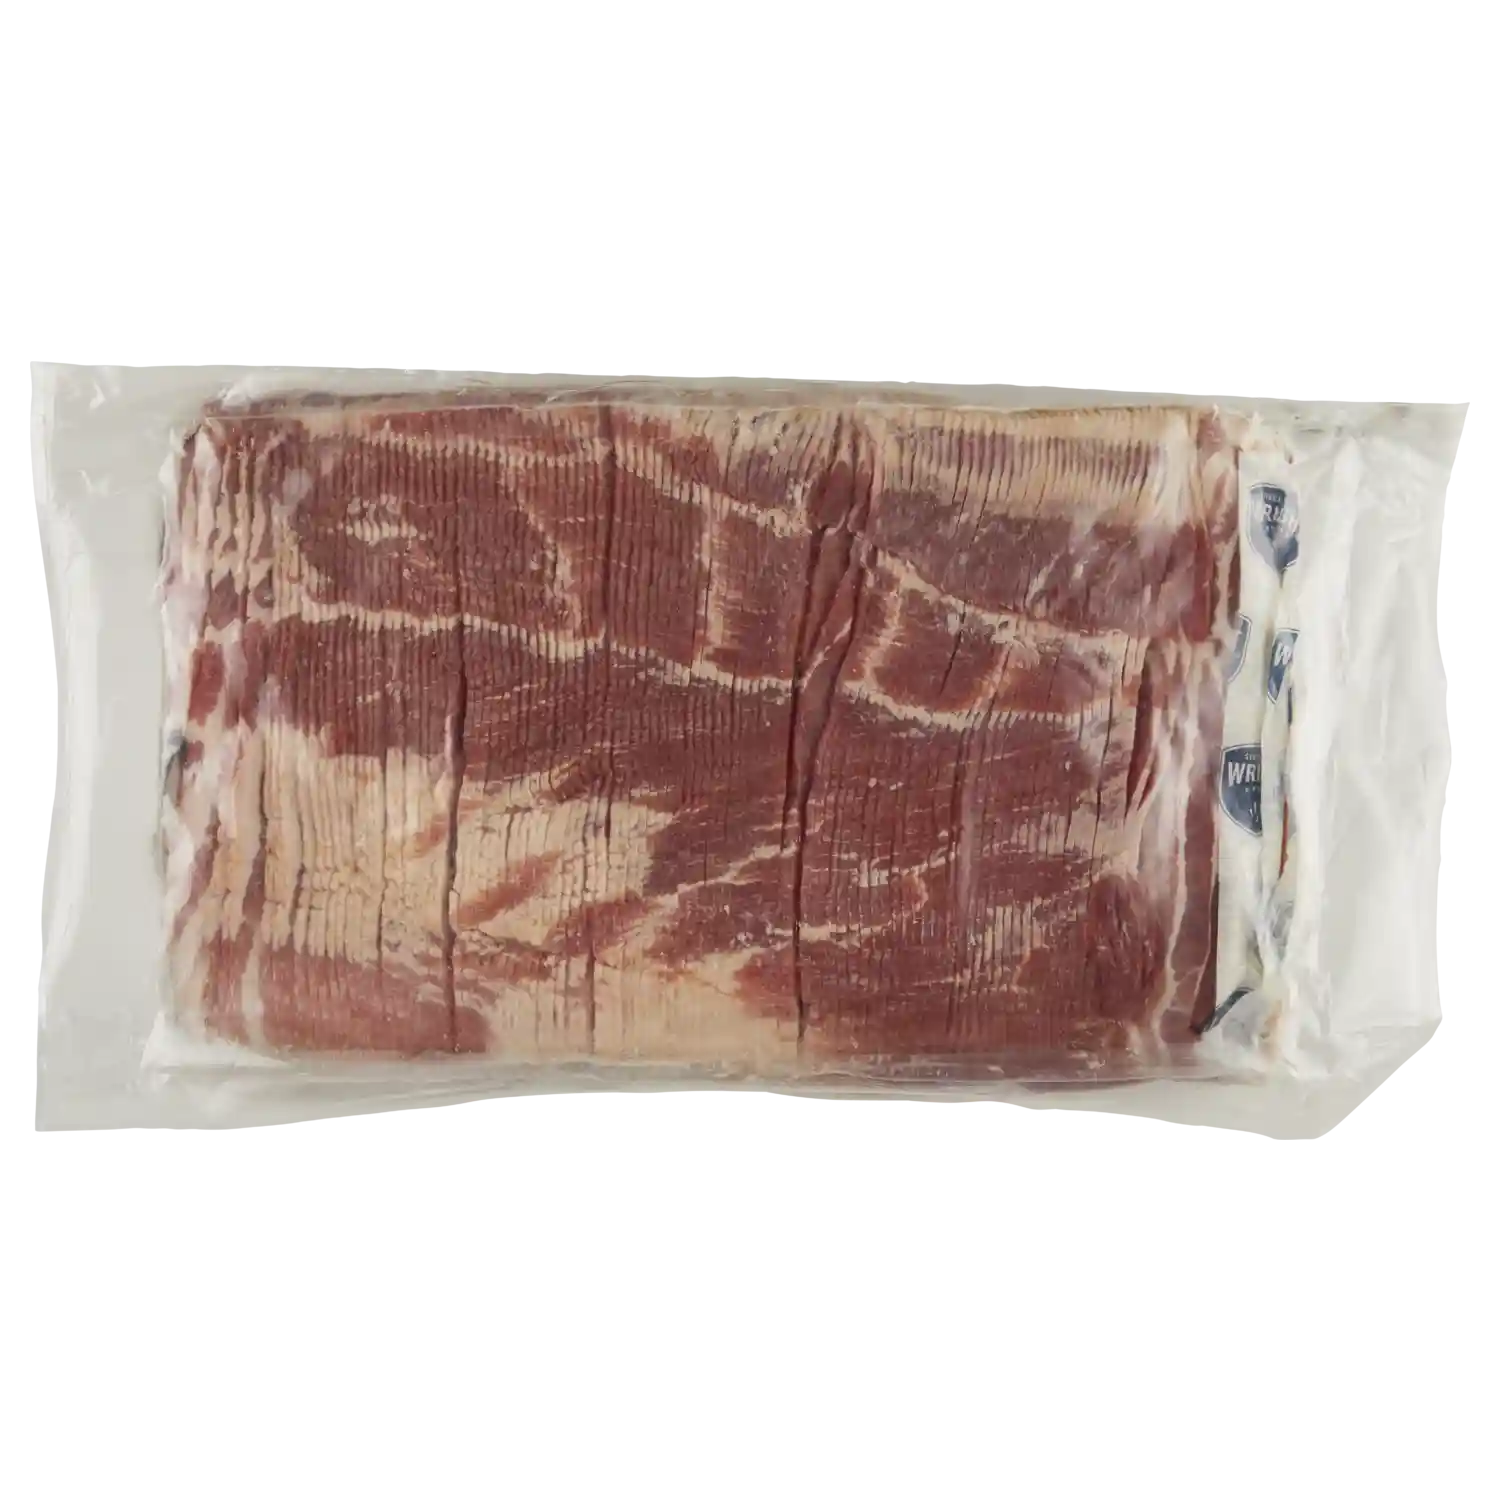 Wright® Brand Naturally Applewood Smoked Thin Sliced Bacon, Bulk, 15 Lbs, 18-22 Slices per Pound, Gas Flushed_image_21